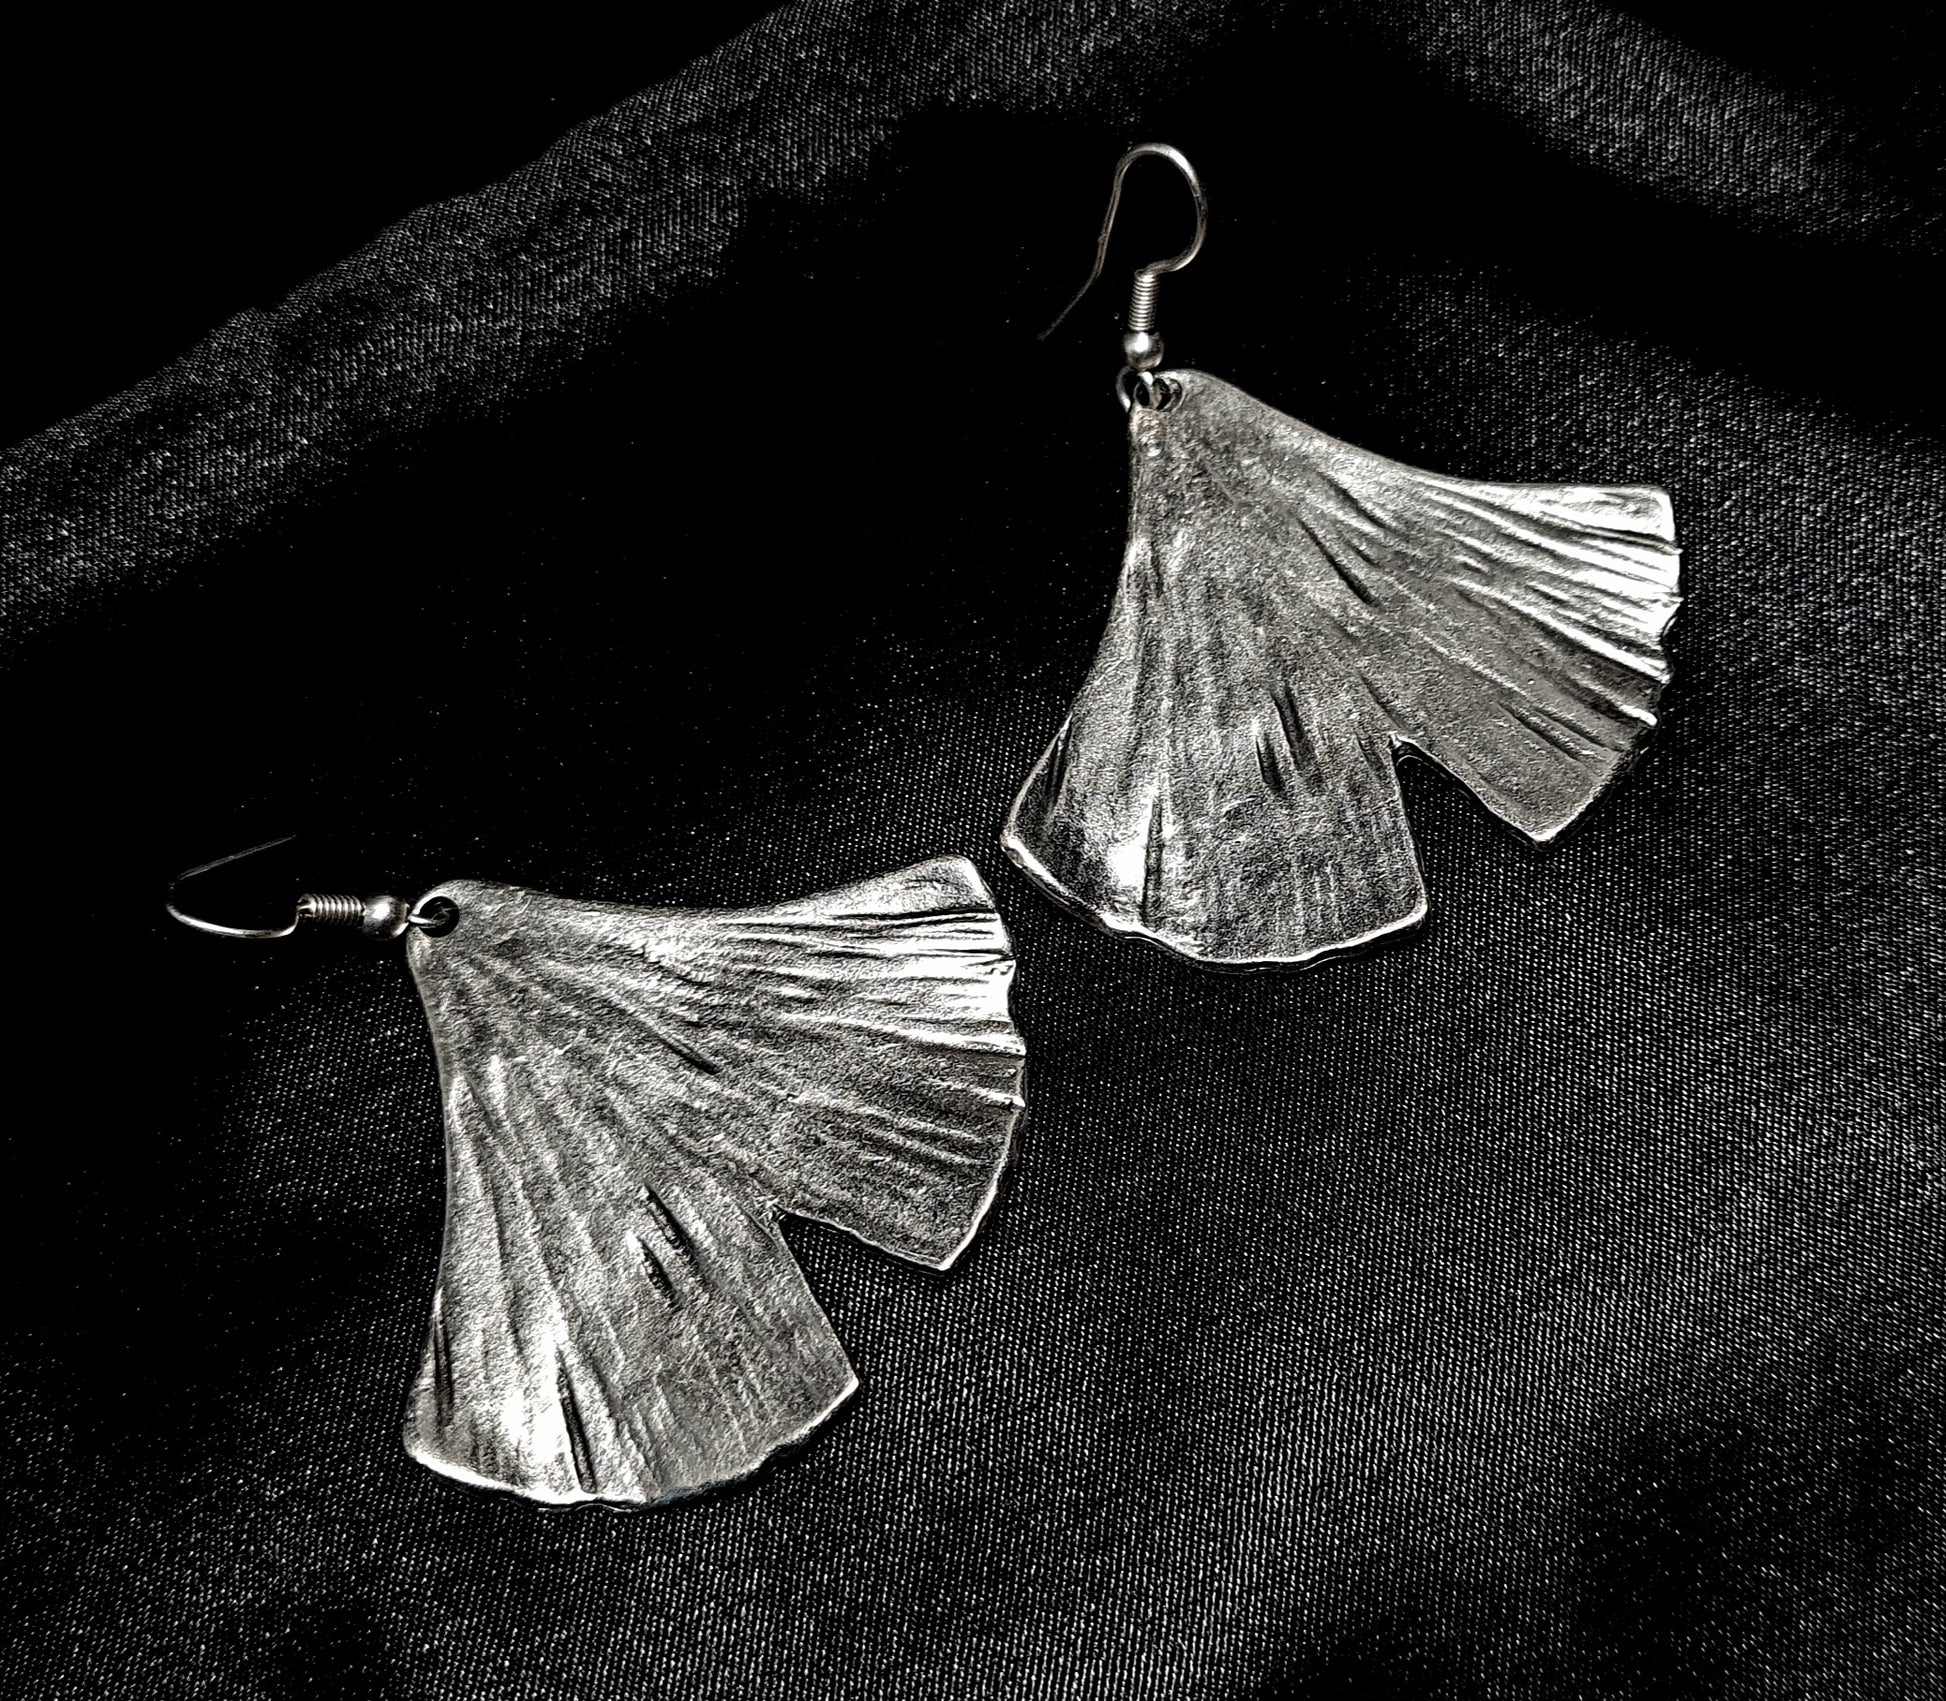 A pair of silver earrings in the shape of a ginkgo leaf sitting on a black surface. The earrings are small and delicate, and they have a shiny finish. The ginkgo leaf is fan-shaped and has a textured appearance.